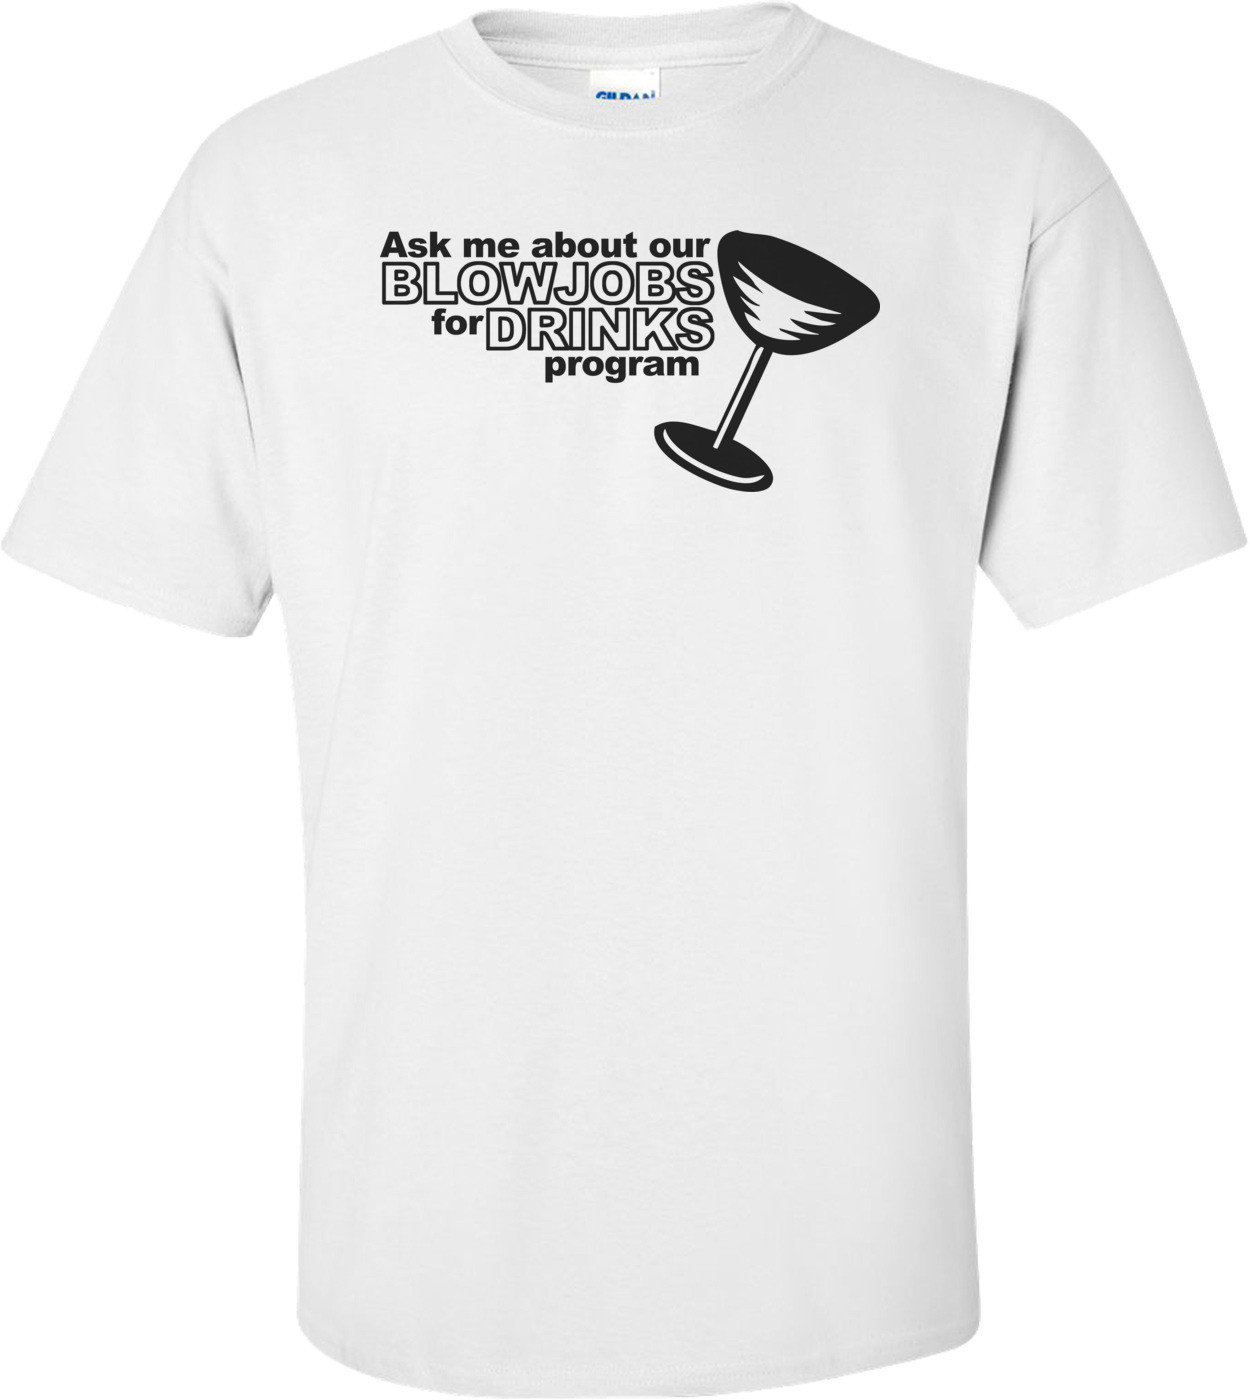 Ask Me About Our Blowjobs For Drinks Program Shirt